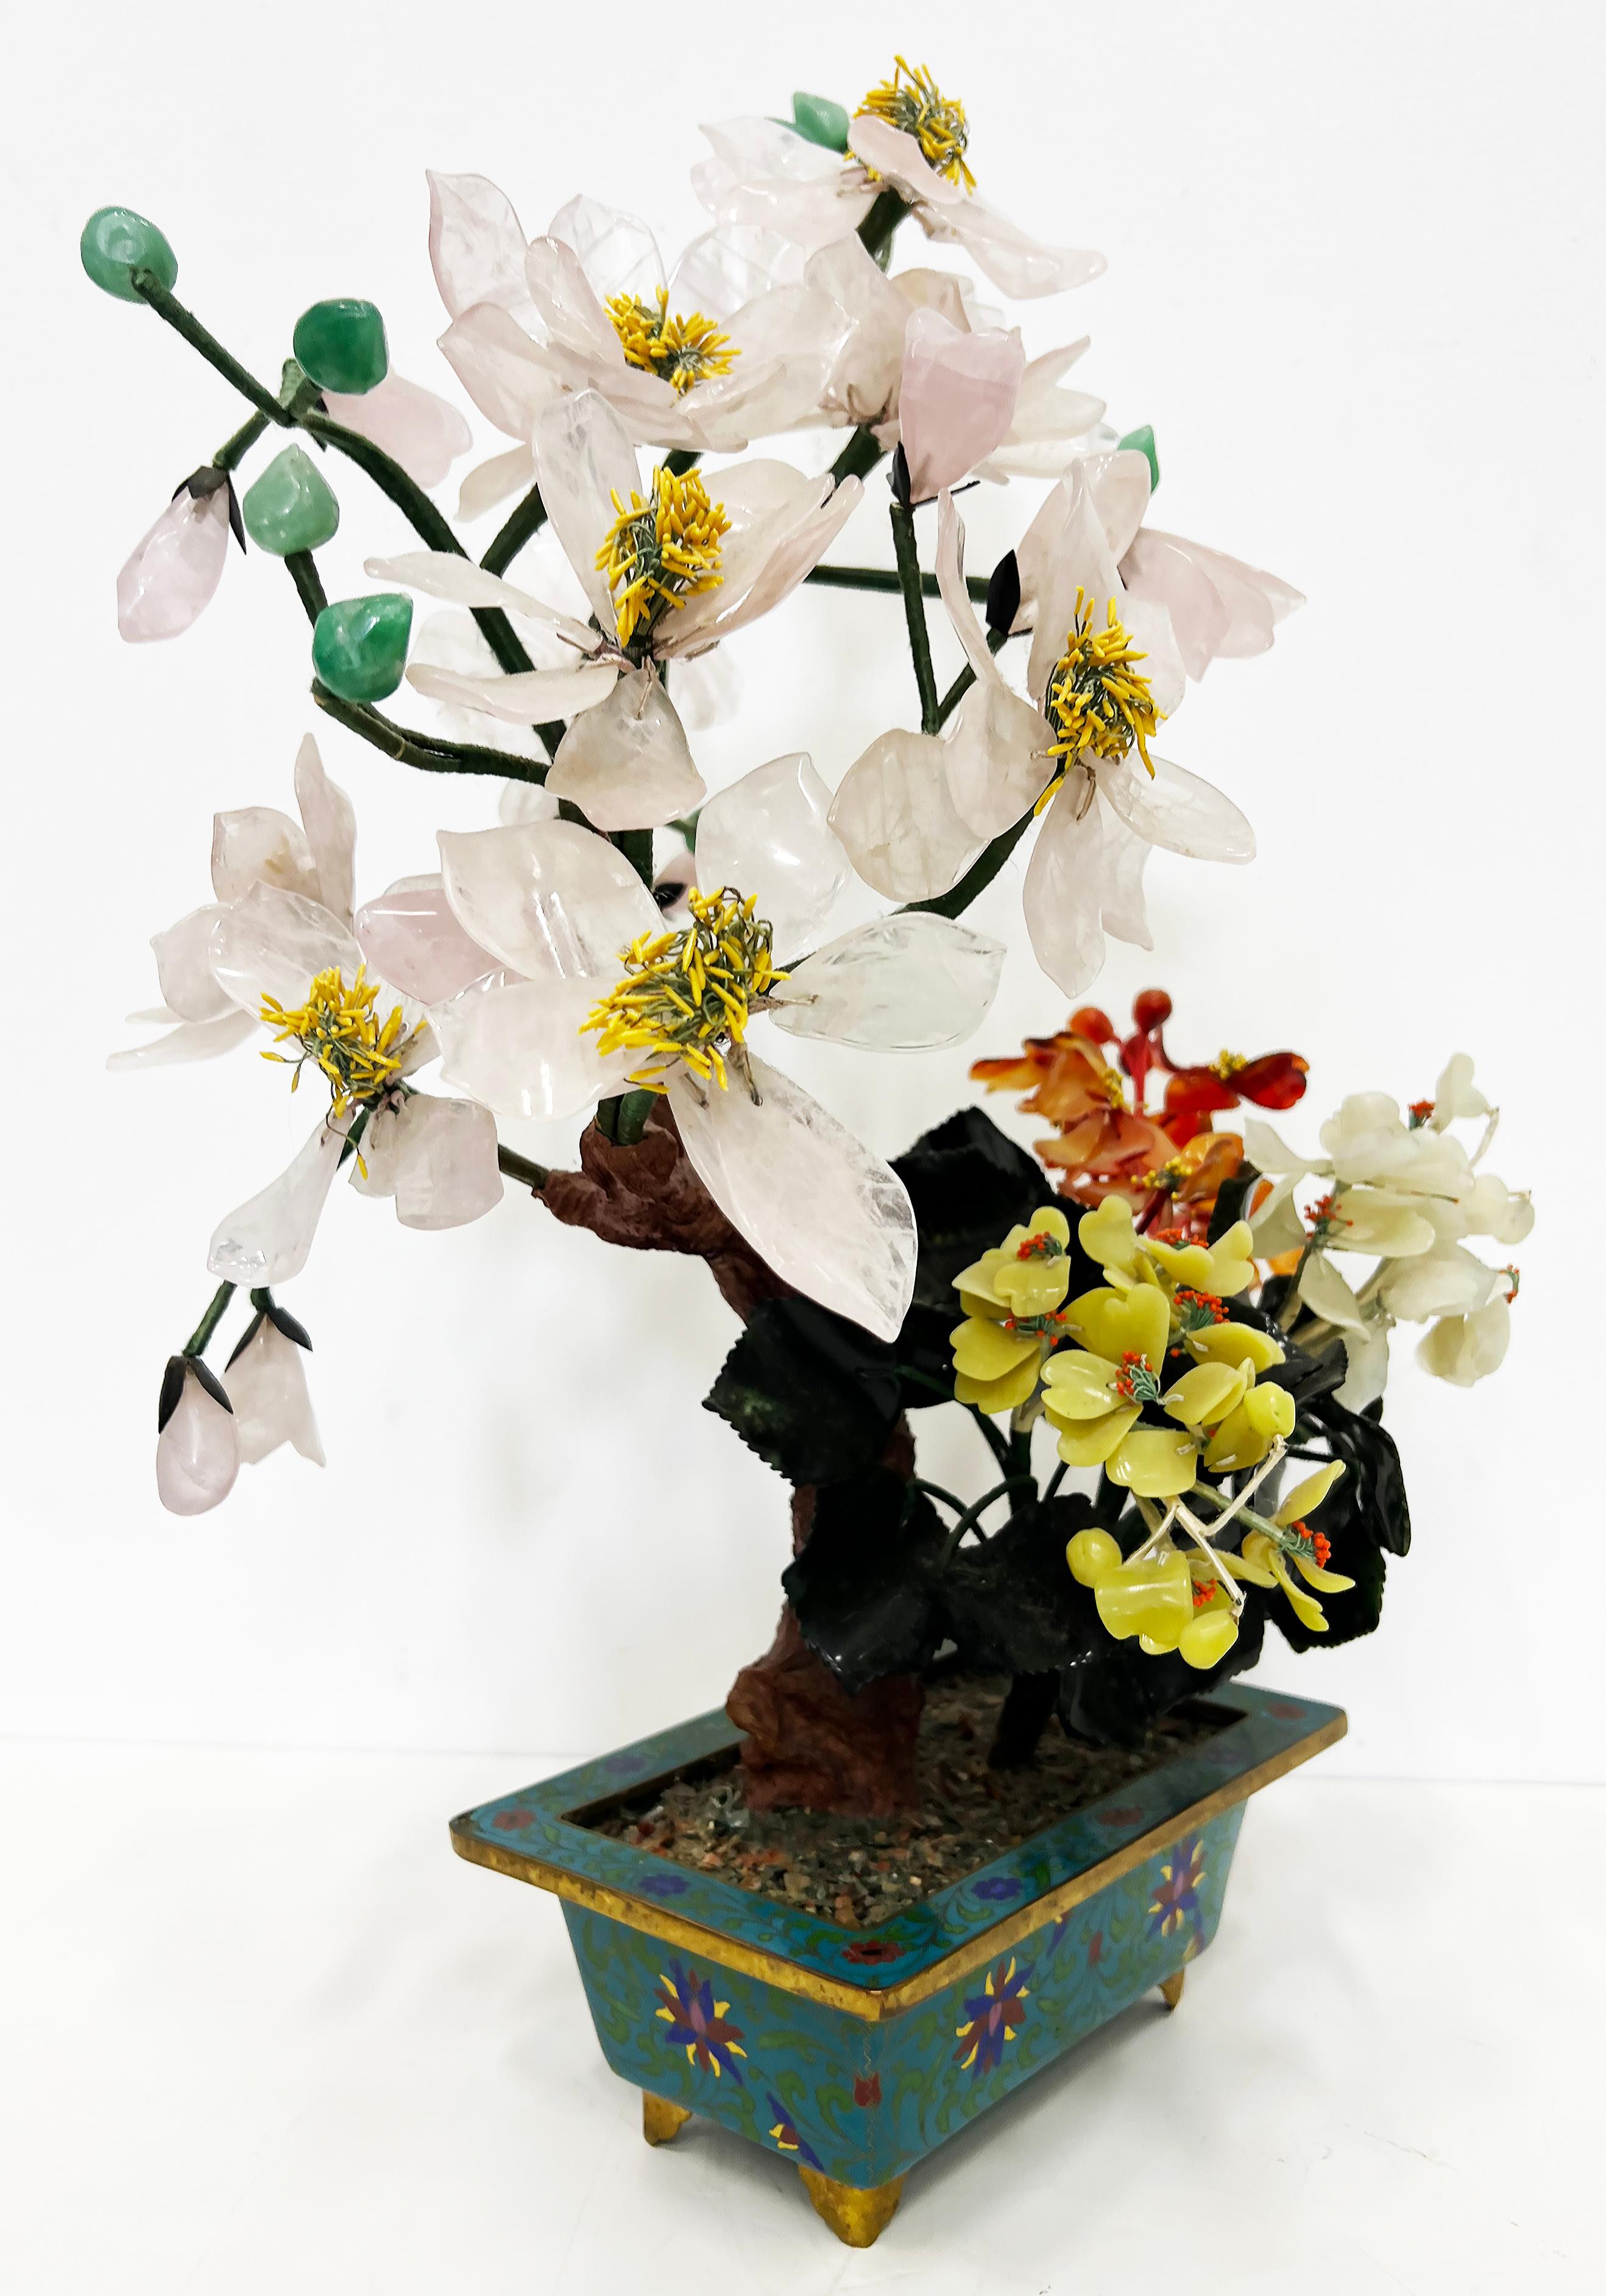 Vintage Chinese Jade Precious Stone Bonsai Tree Sculpture, Cloisonné Planter In Good Condition For Sale In Miami, FL